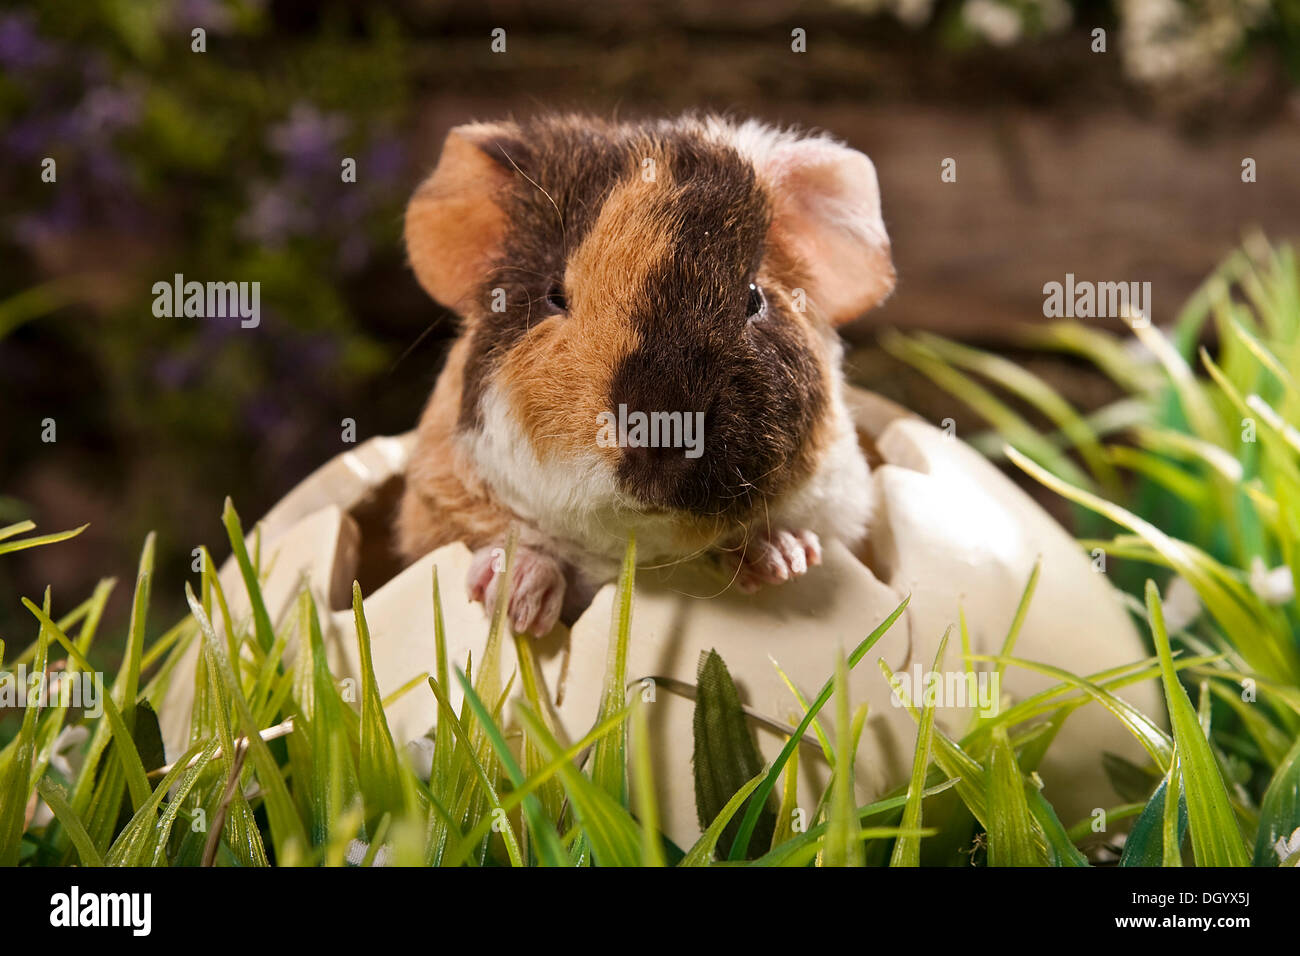 US Teddy guinea pig, young in an egg shell Stock Photo